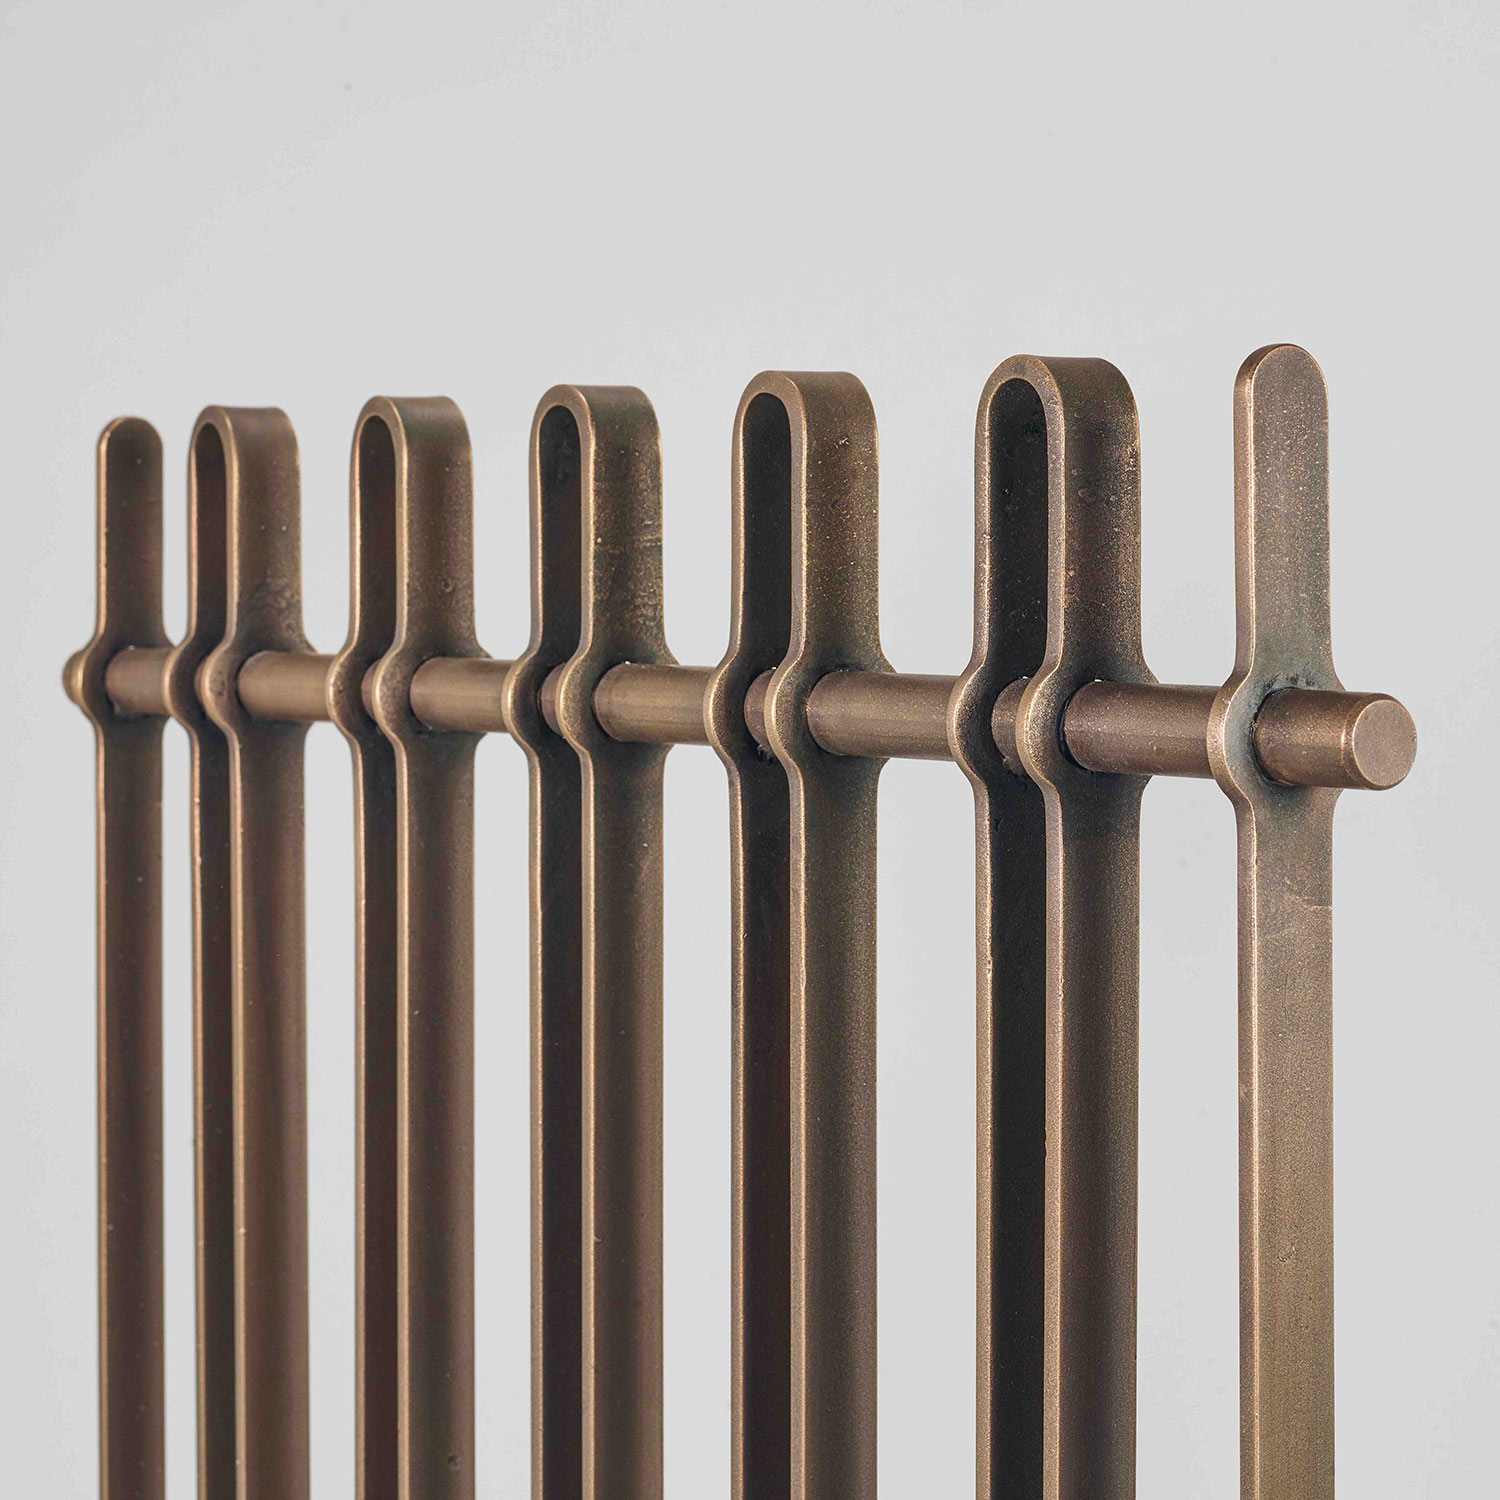 Continuous line railing detail, forged bronze, 2018, Photo by Hugh Fox